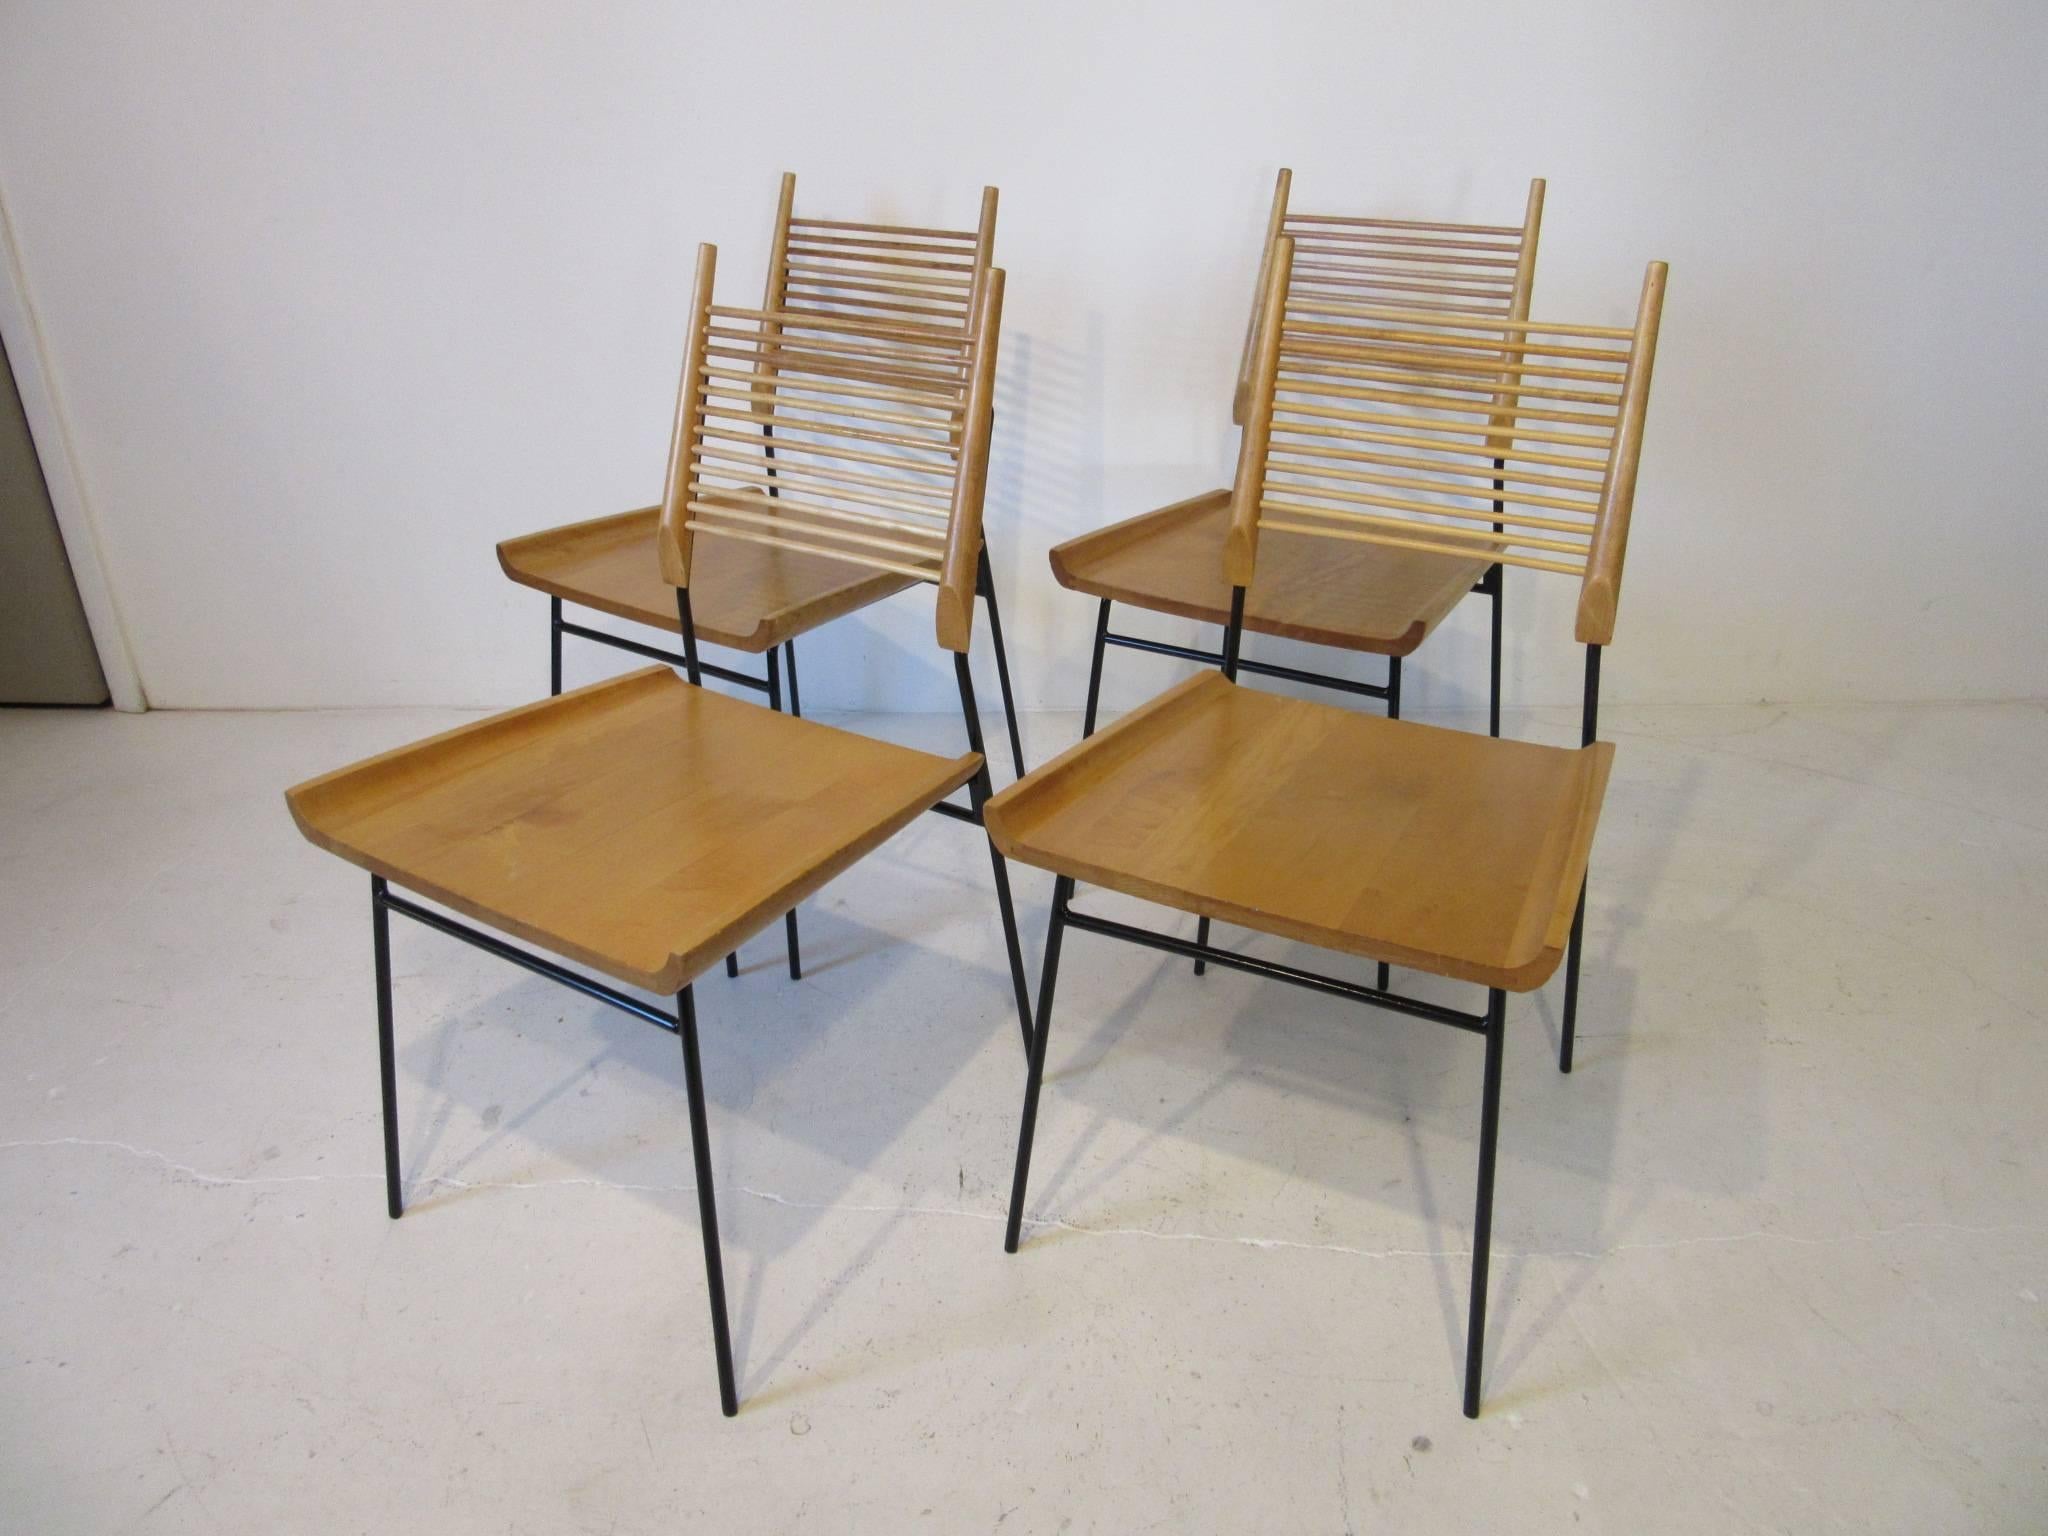 Wood Paul McCobb Shovel Seat Dining Chairs from the Planner Group